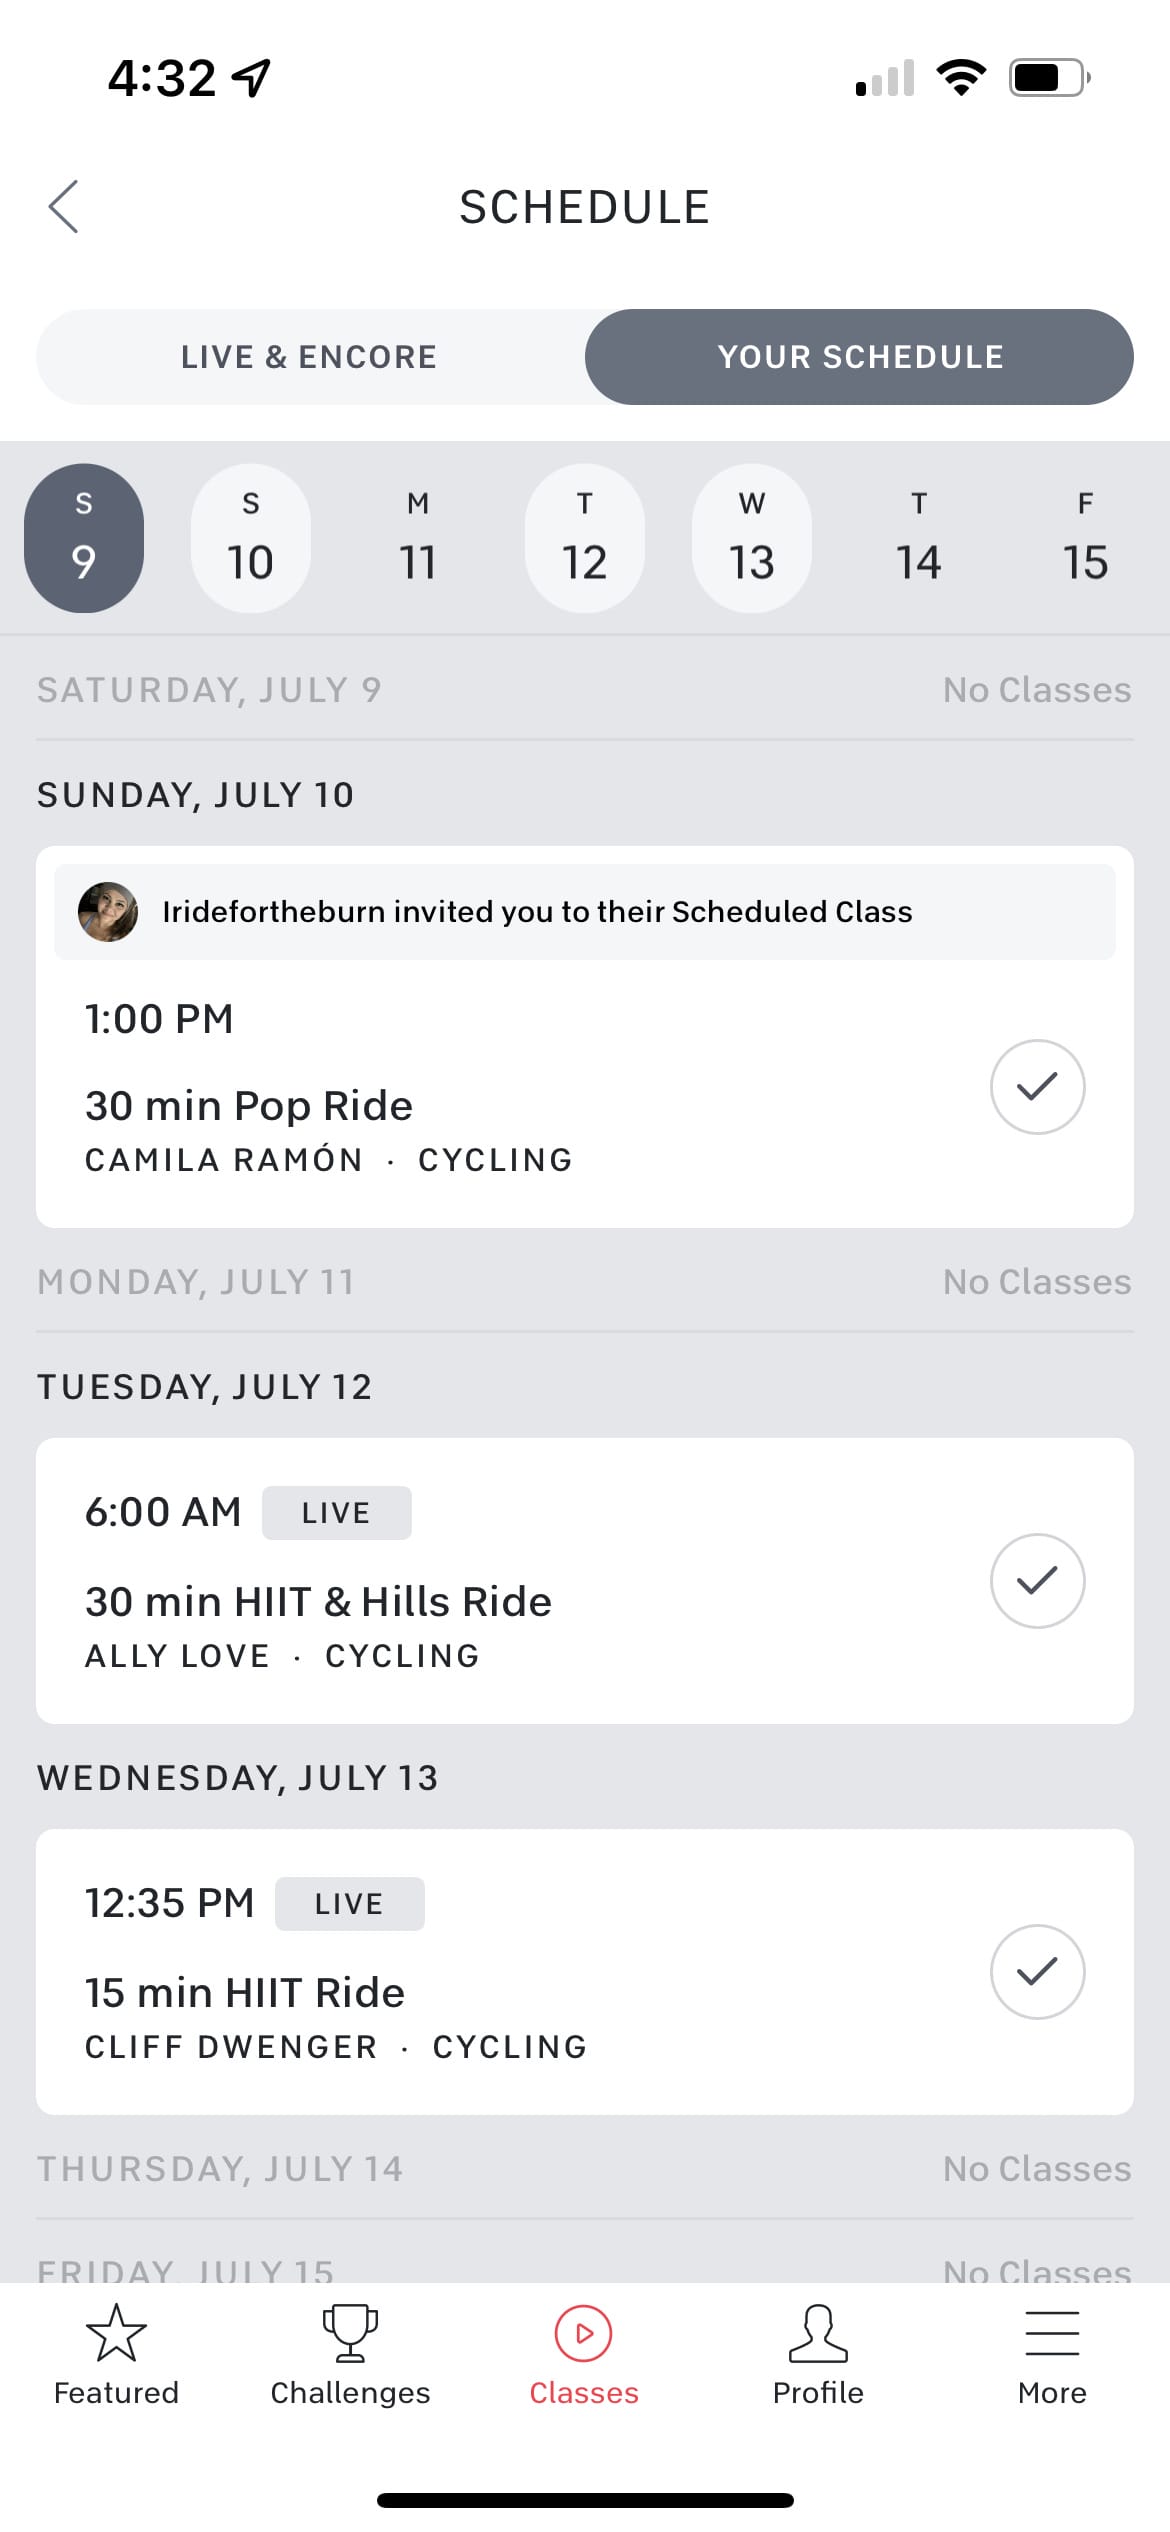 "Your" upcoming schedule showing invited classes on mobile device.